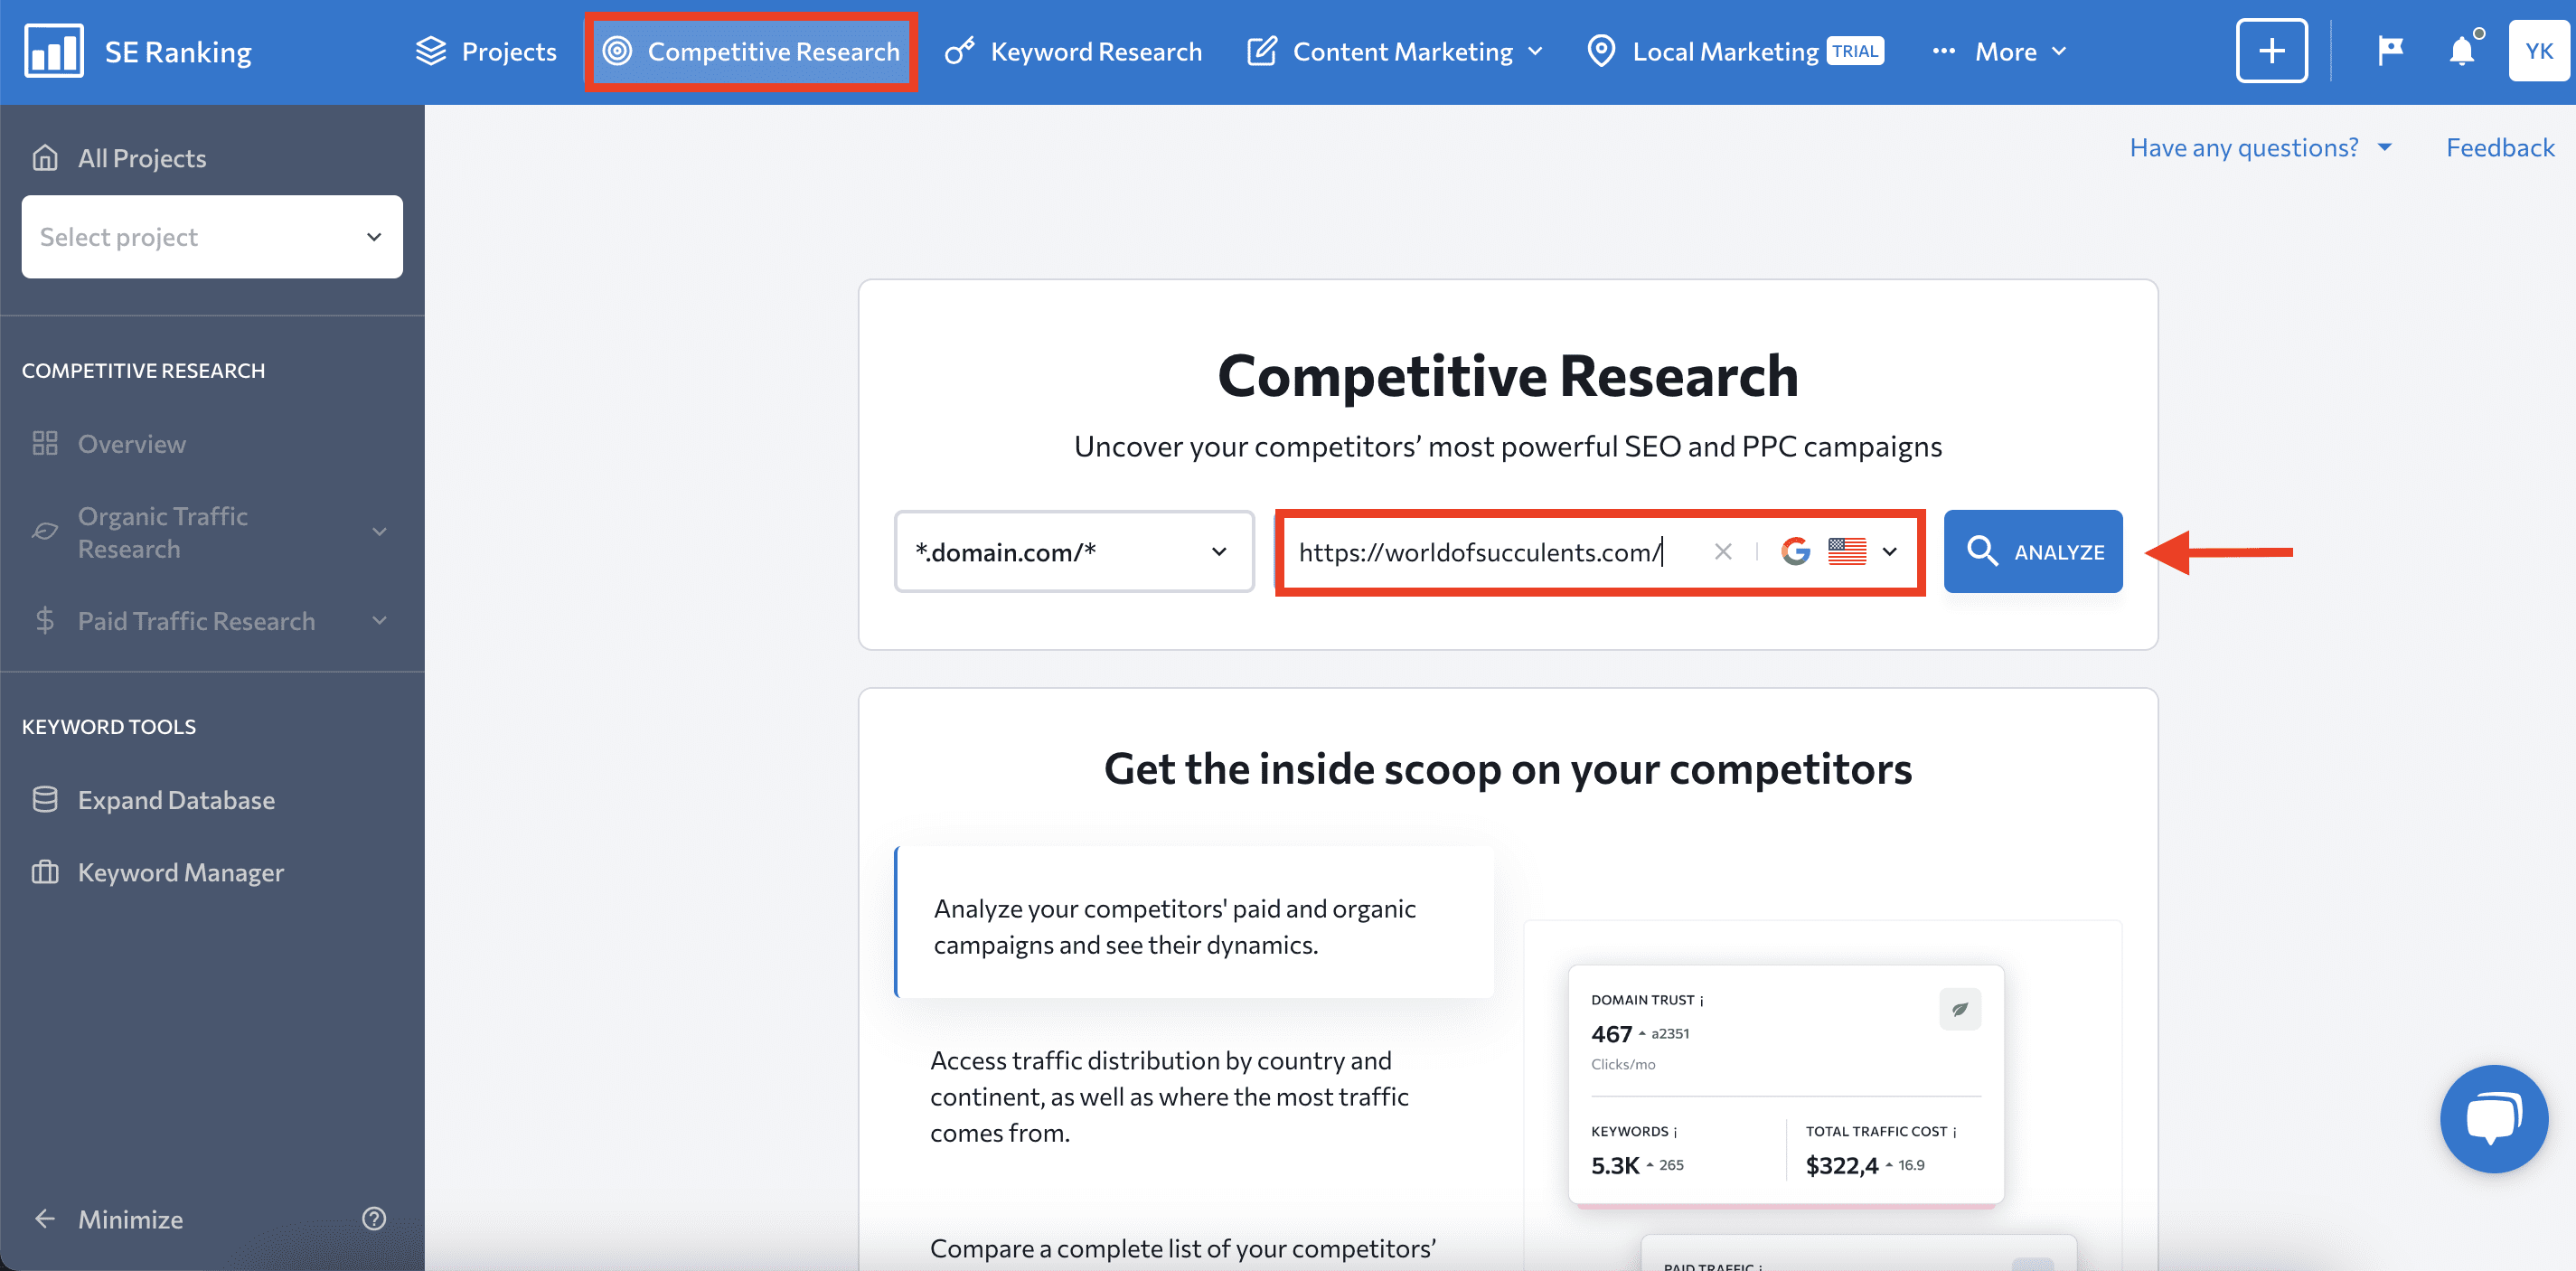 How to launch competitive research with SE Ranking